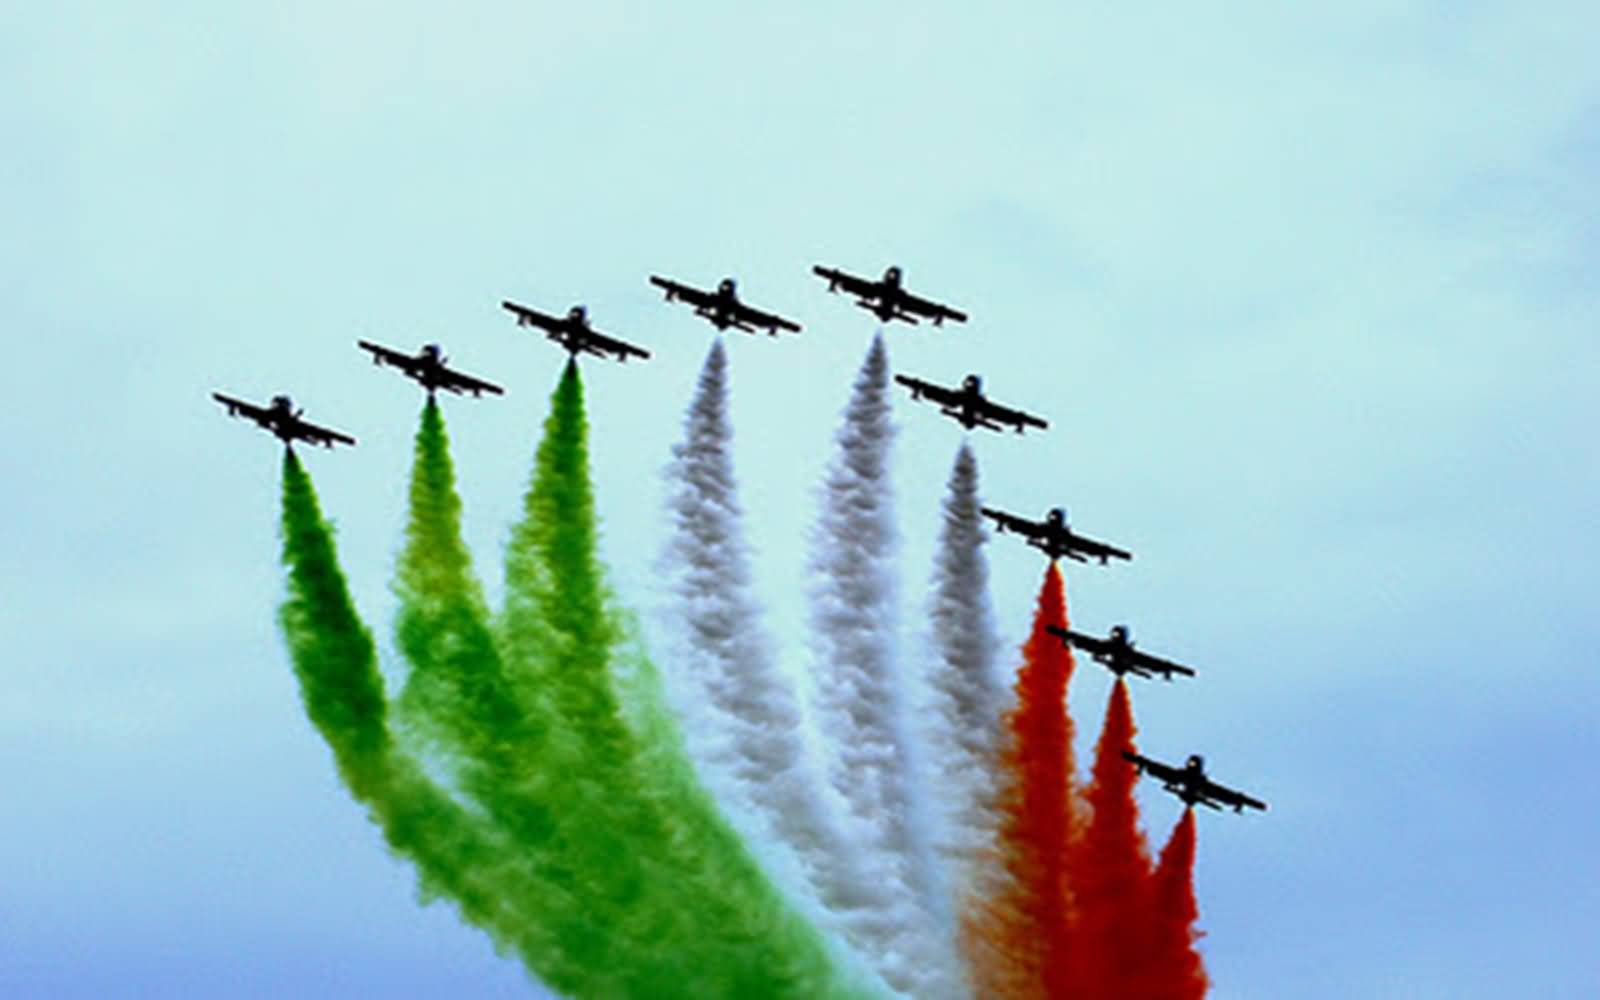 Air Show During Republic Day